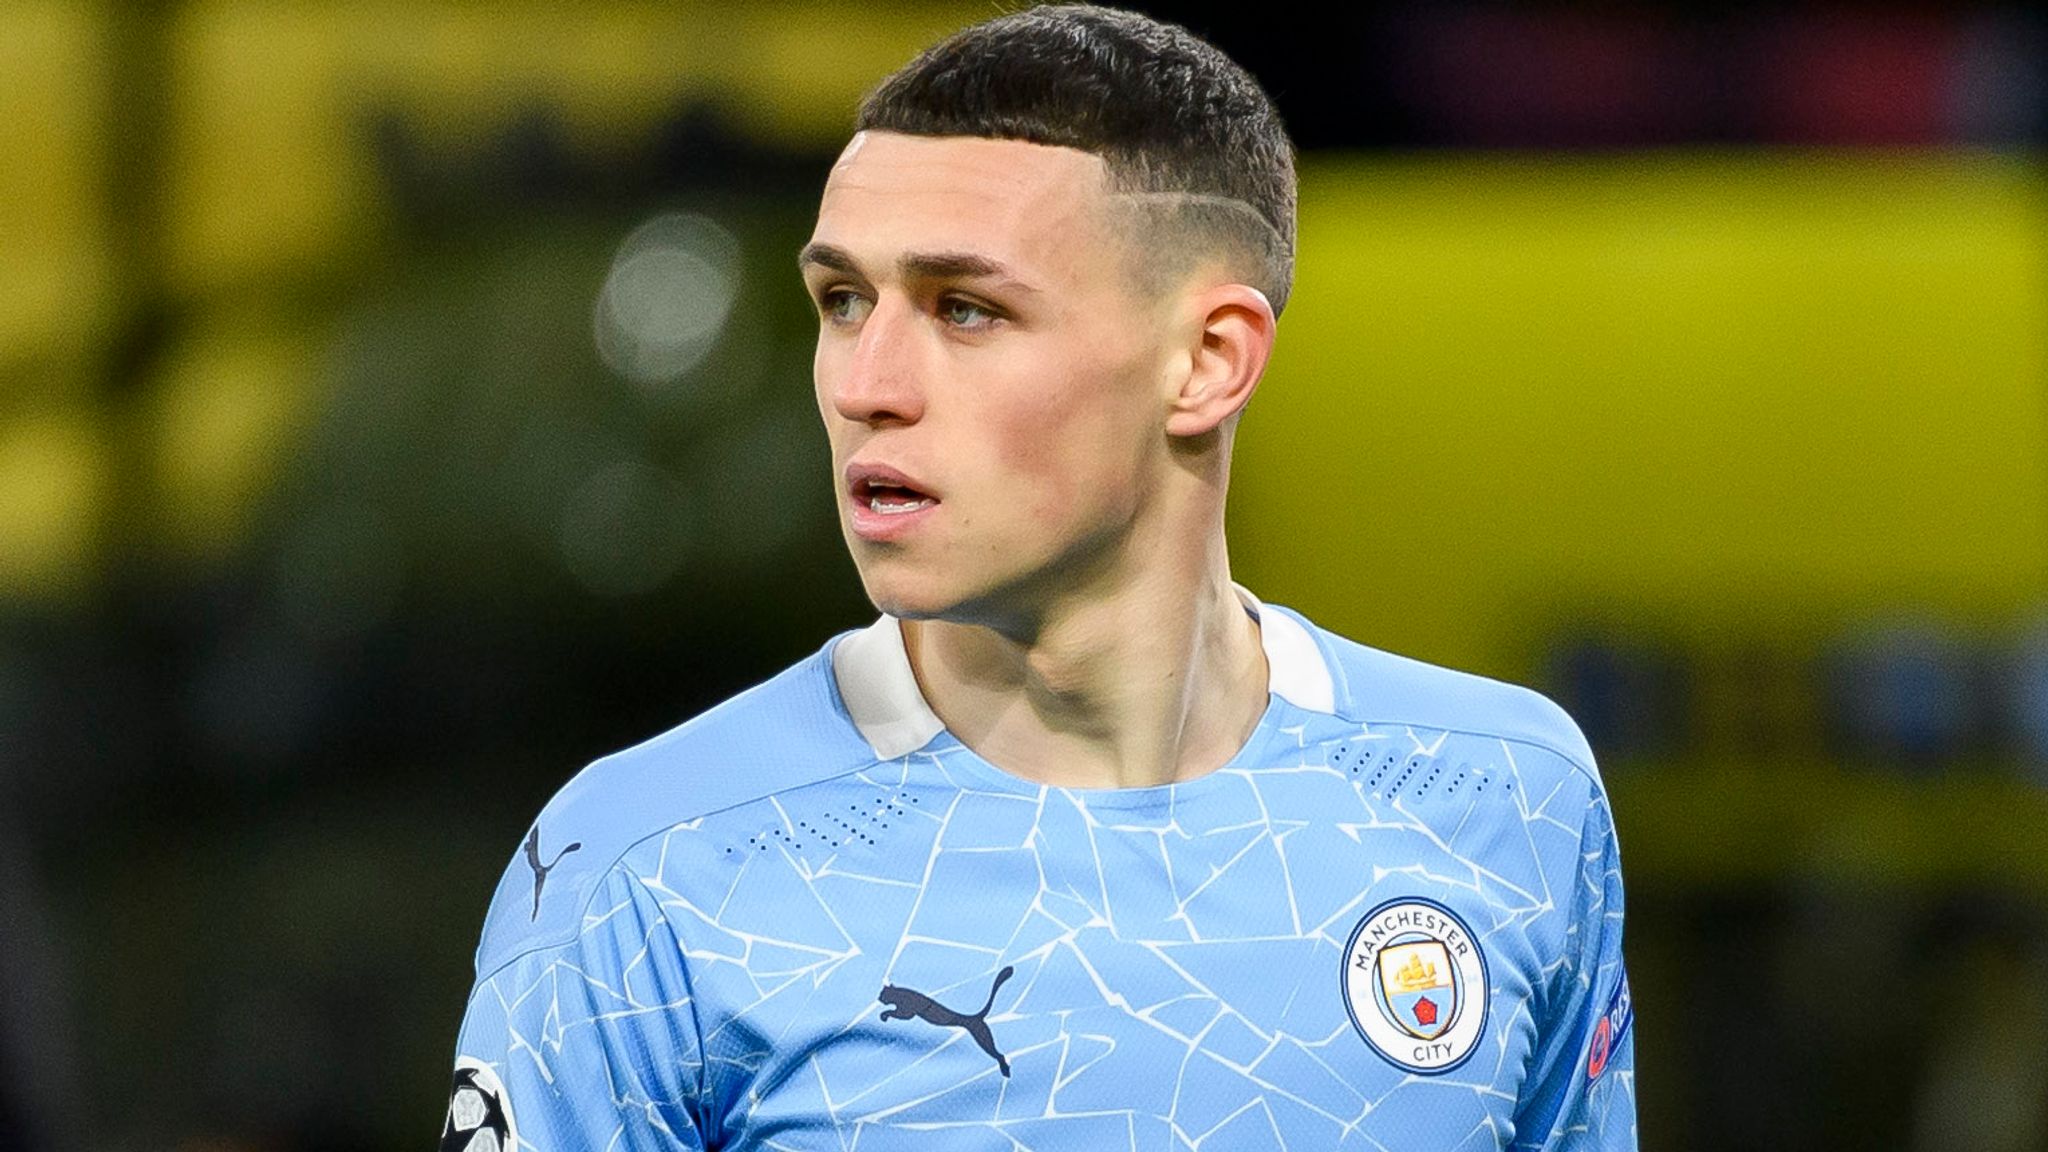 Phil Foden's Blonde Hair Sparks Social Media Frenzy - wide 6